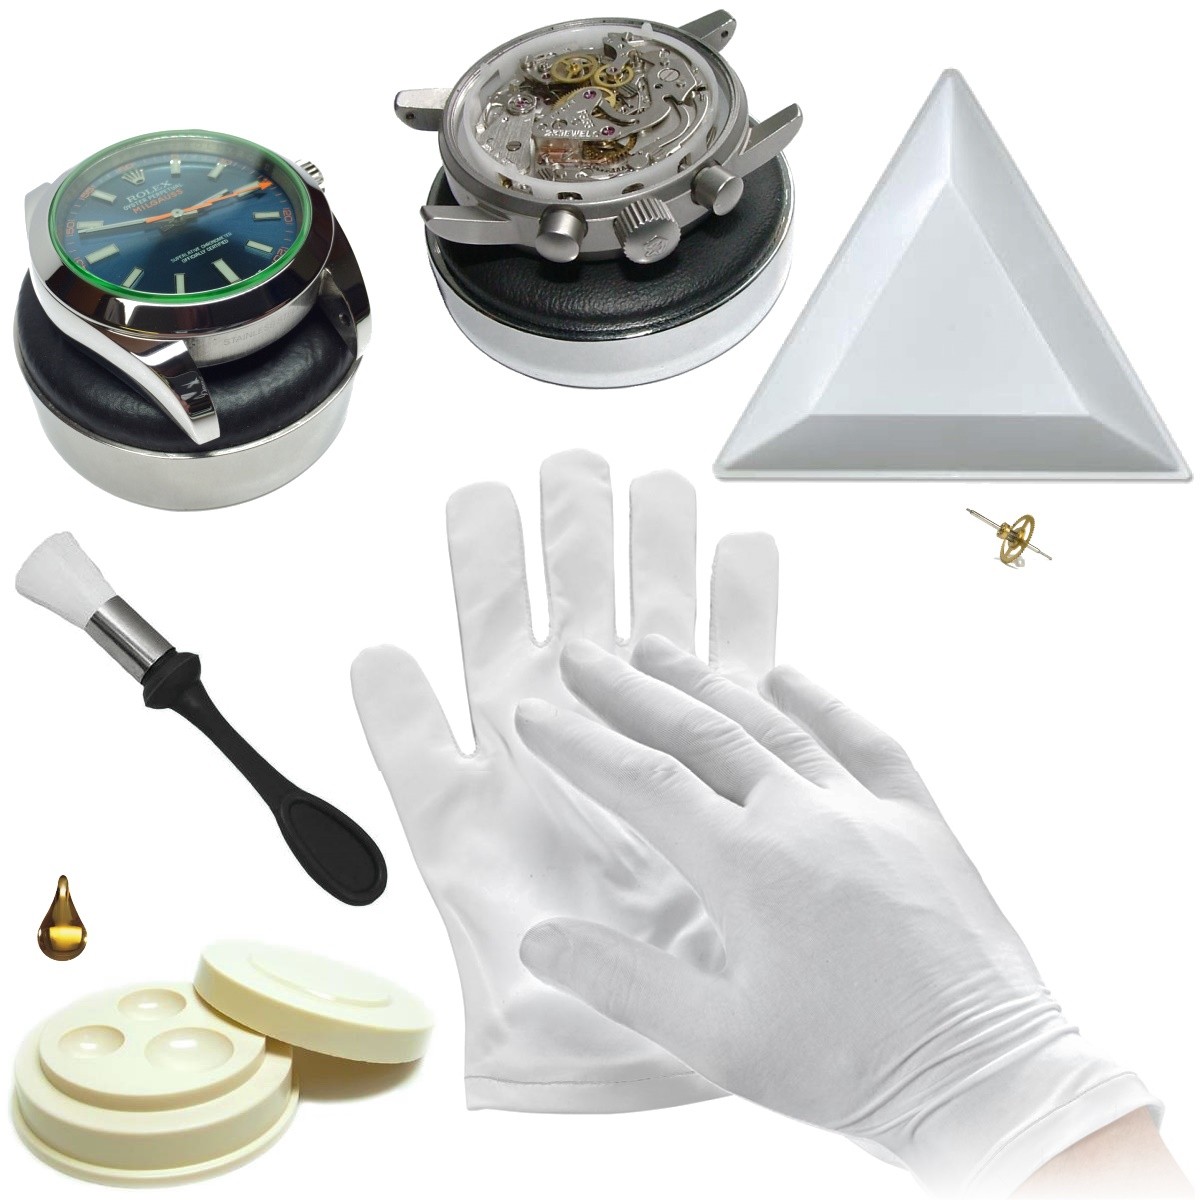 BULLONGÈ CARE-X kit for watch repair, polishing and cleaning - Ultimate  accessory for watch repair, polishing and cleaning